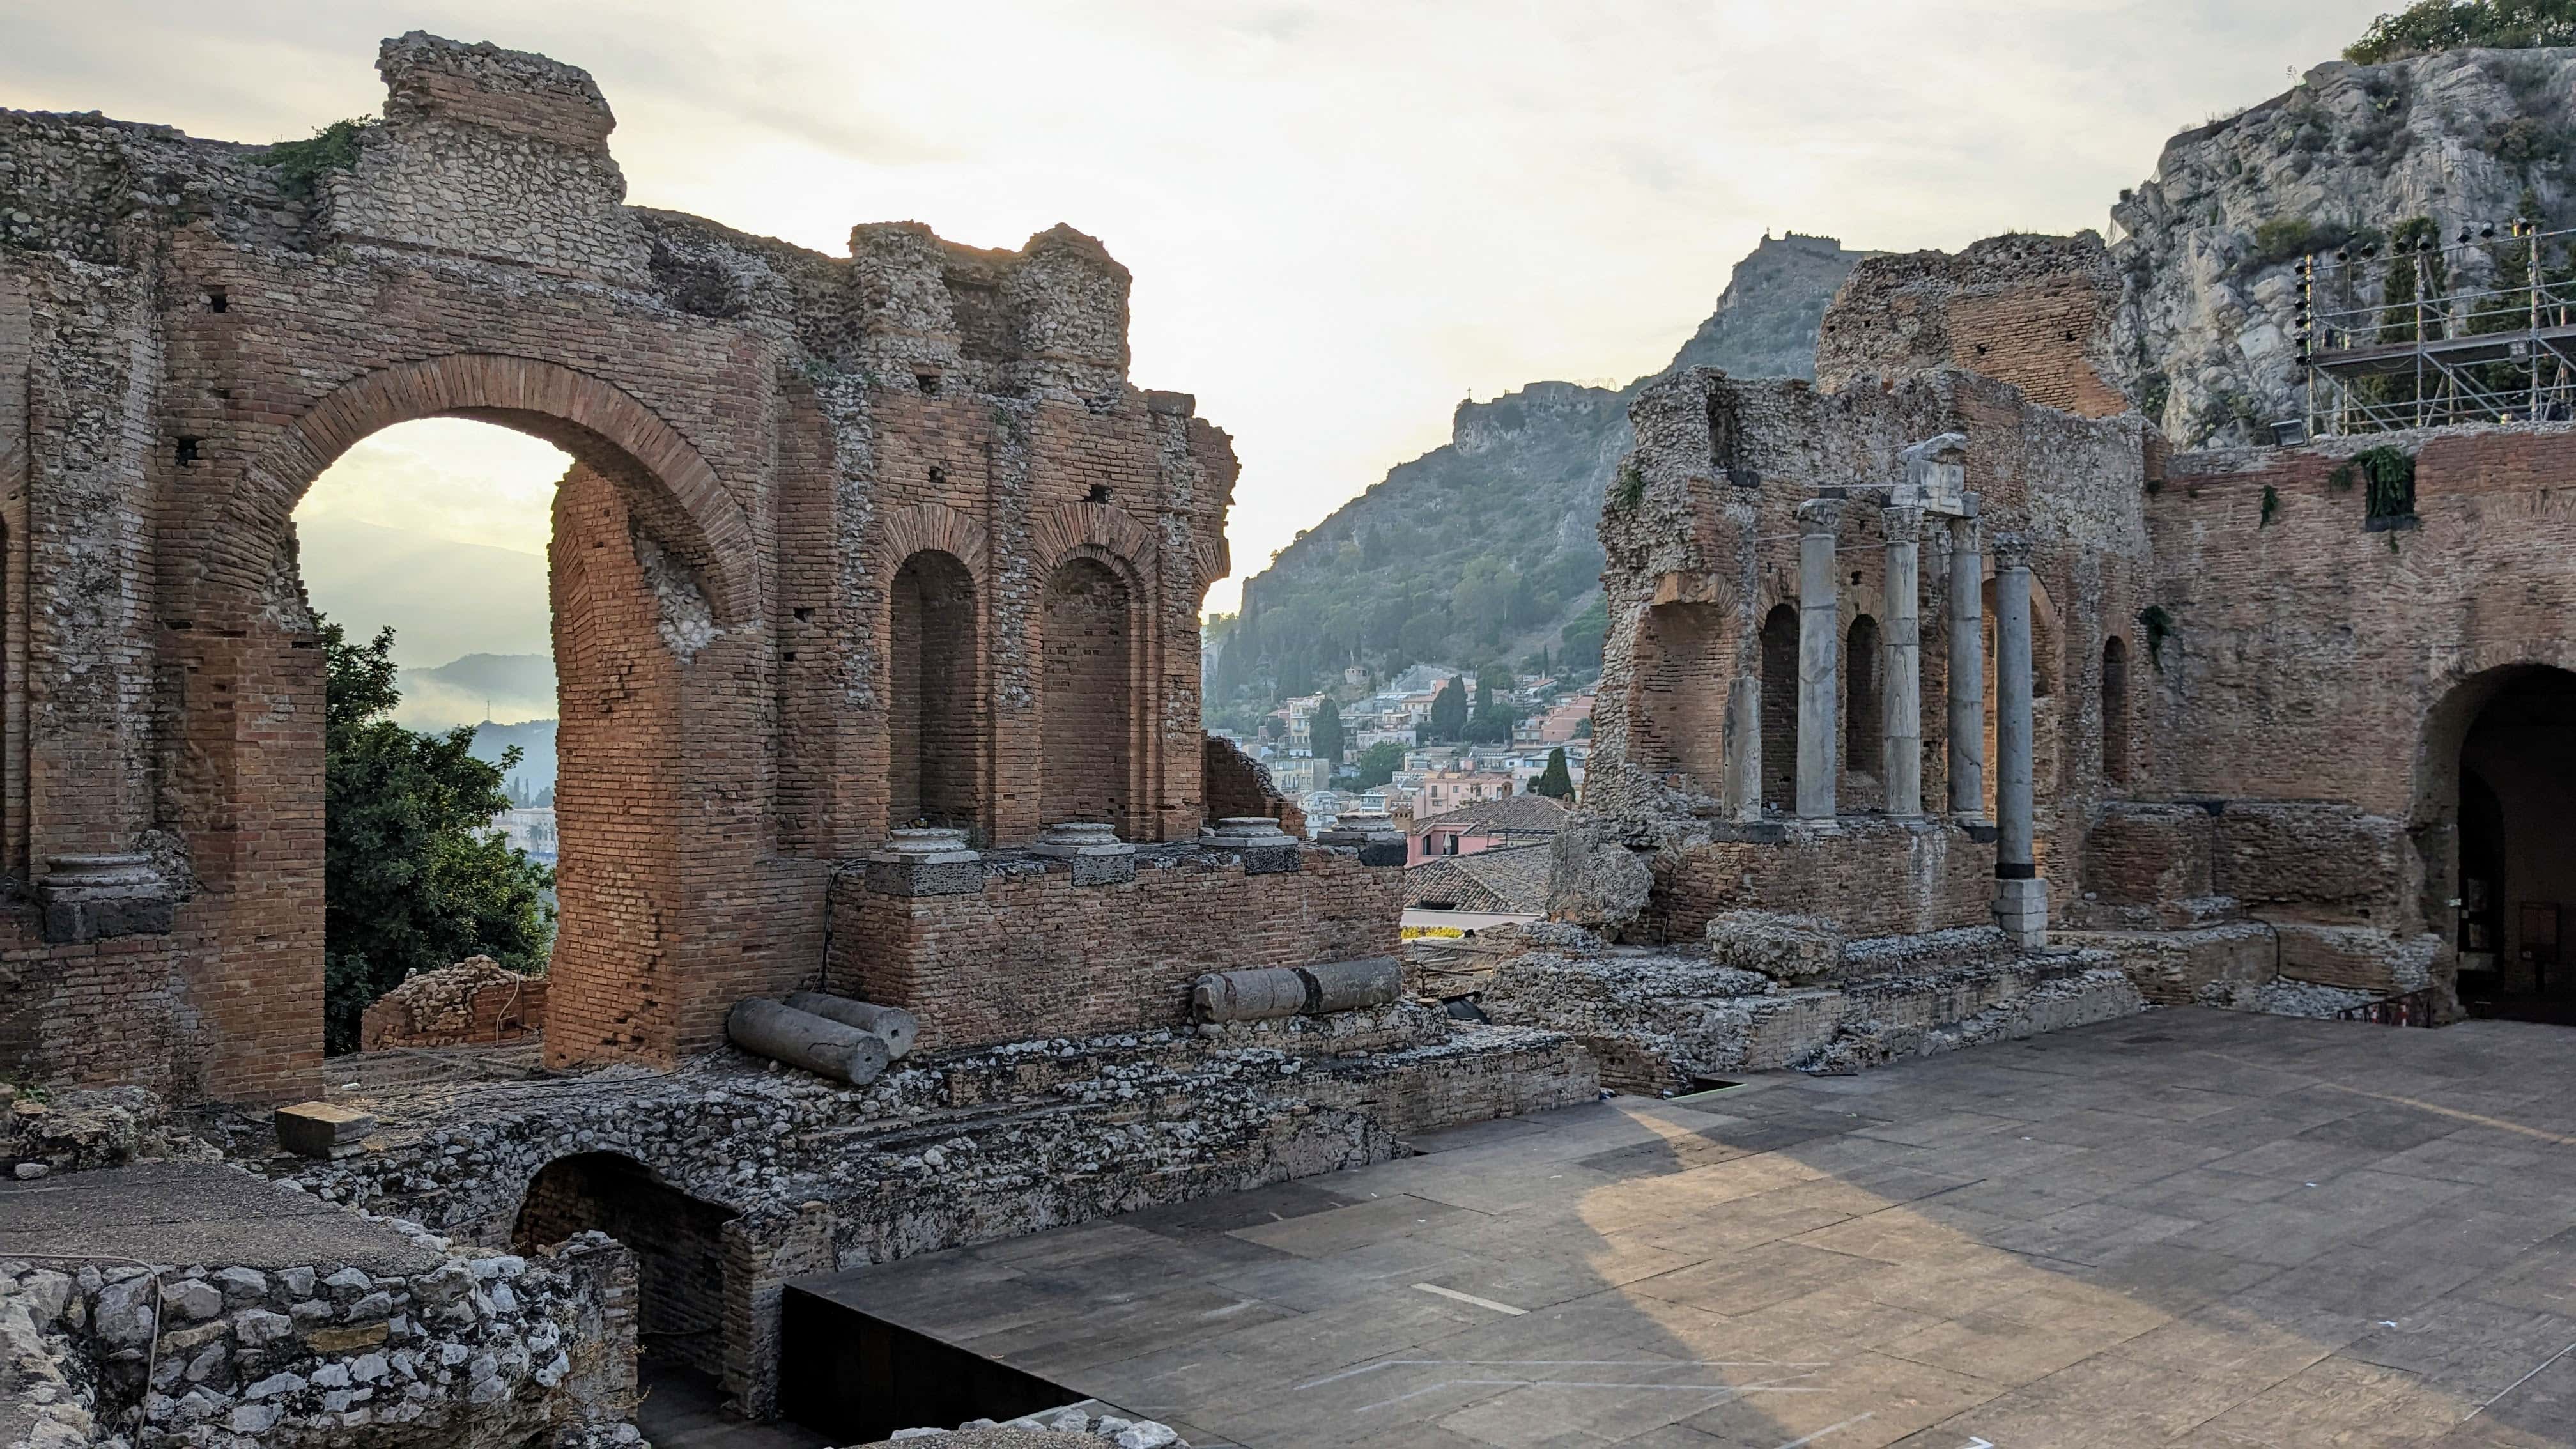 Visiting Taormina: Everything You Need to Know